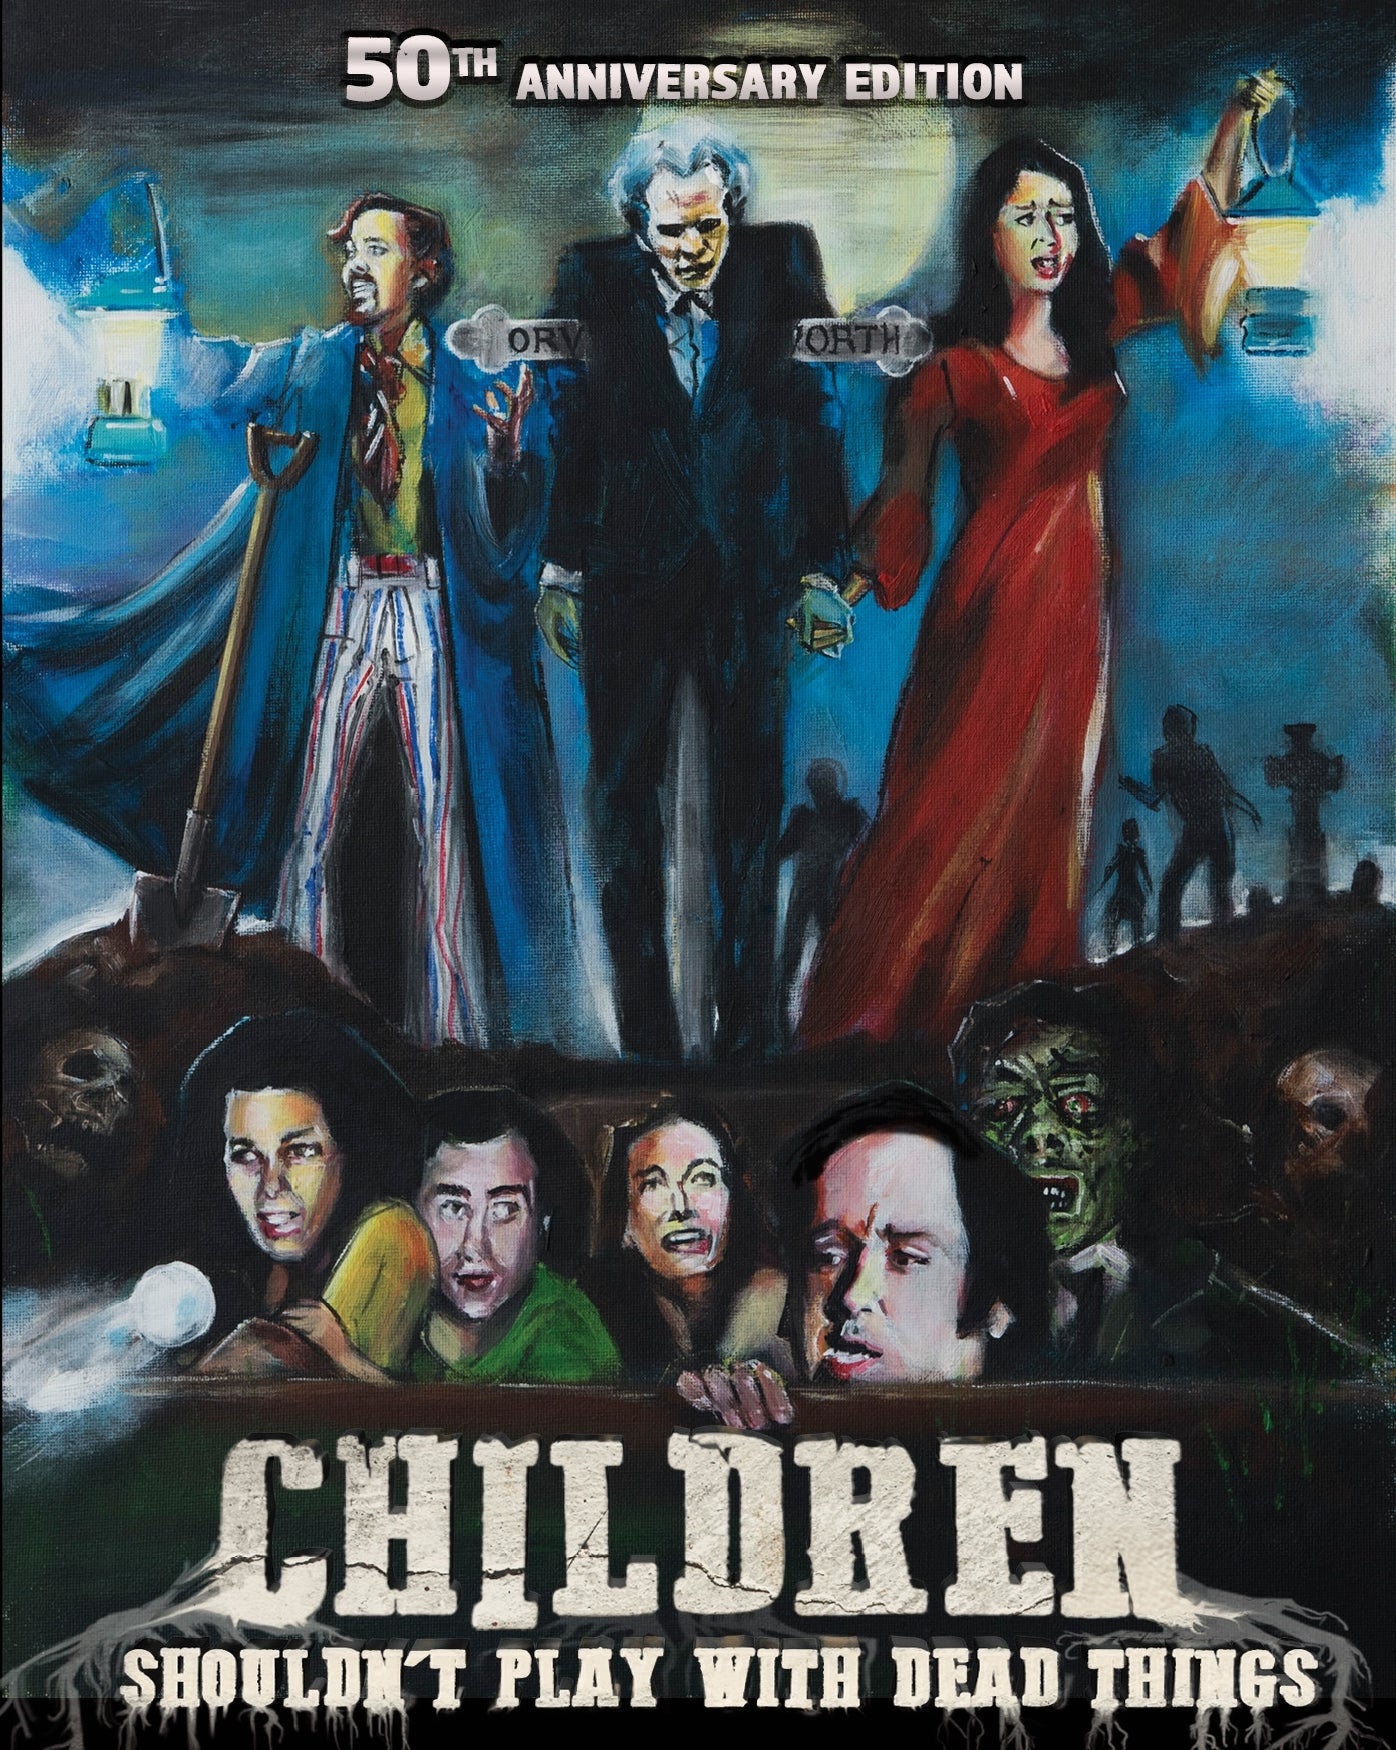 CHILDREN SHOULDN'T PLAY WITH DEAD THINGS BLU-RAY